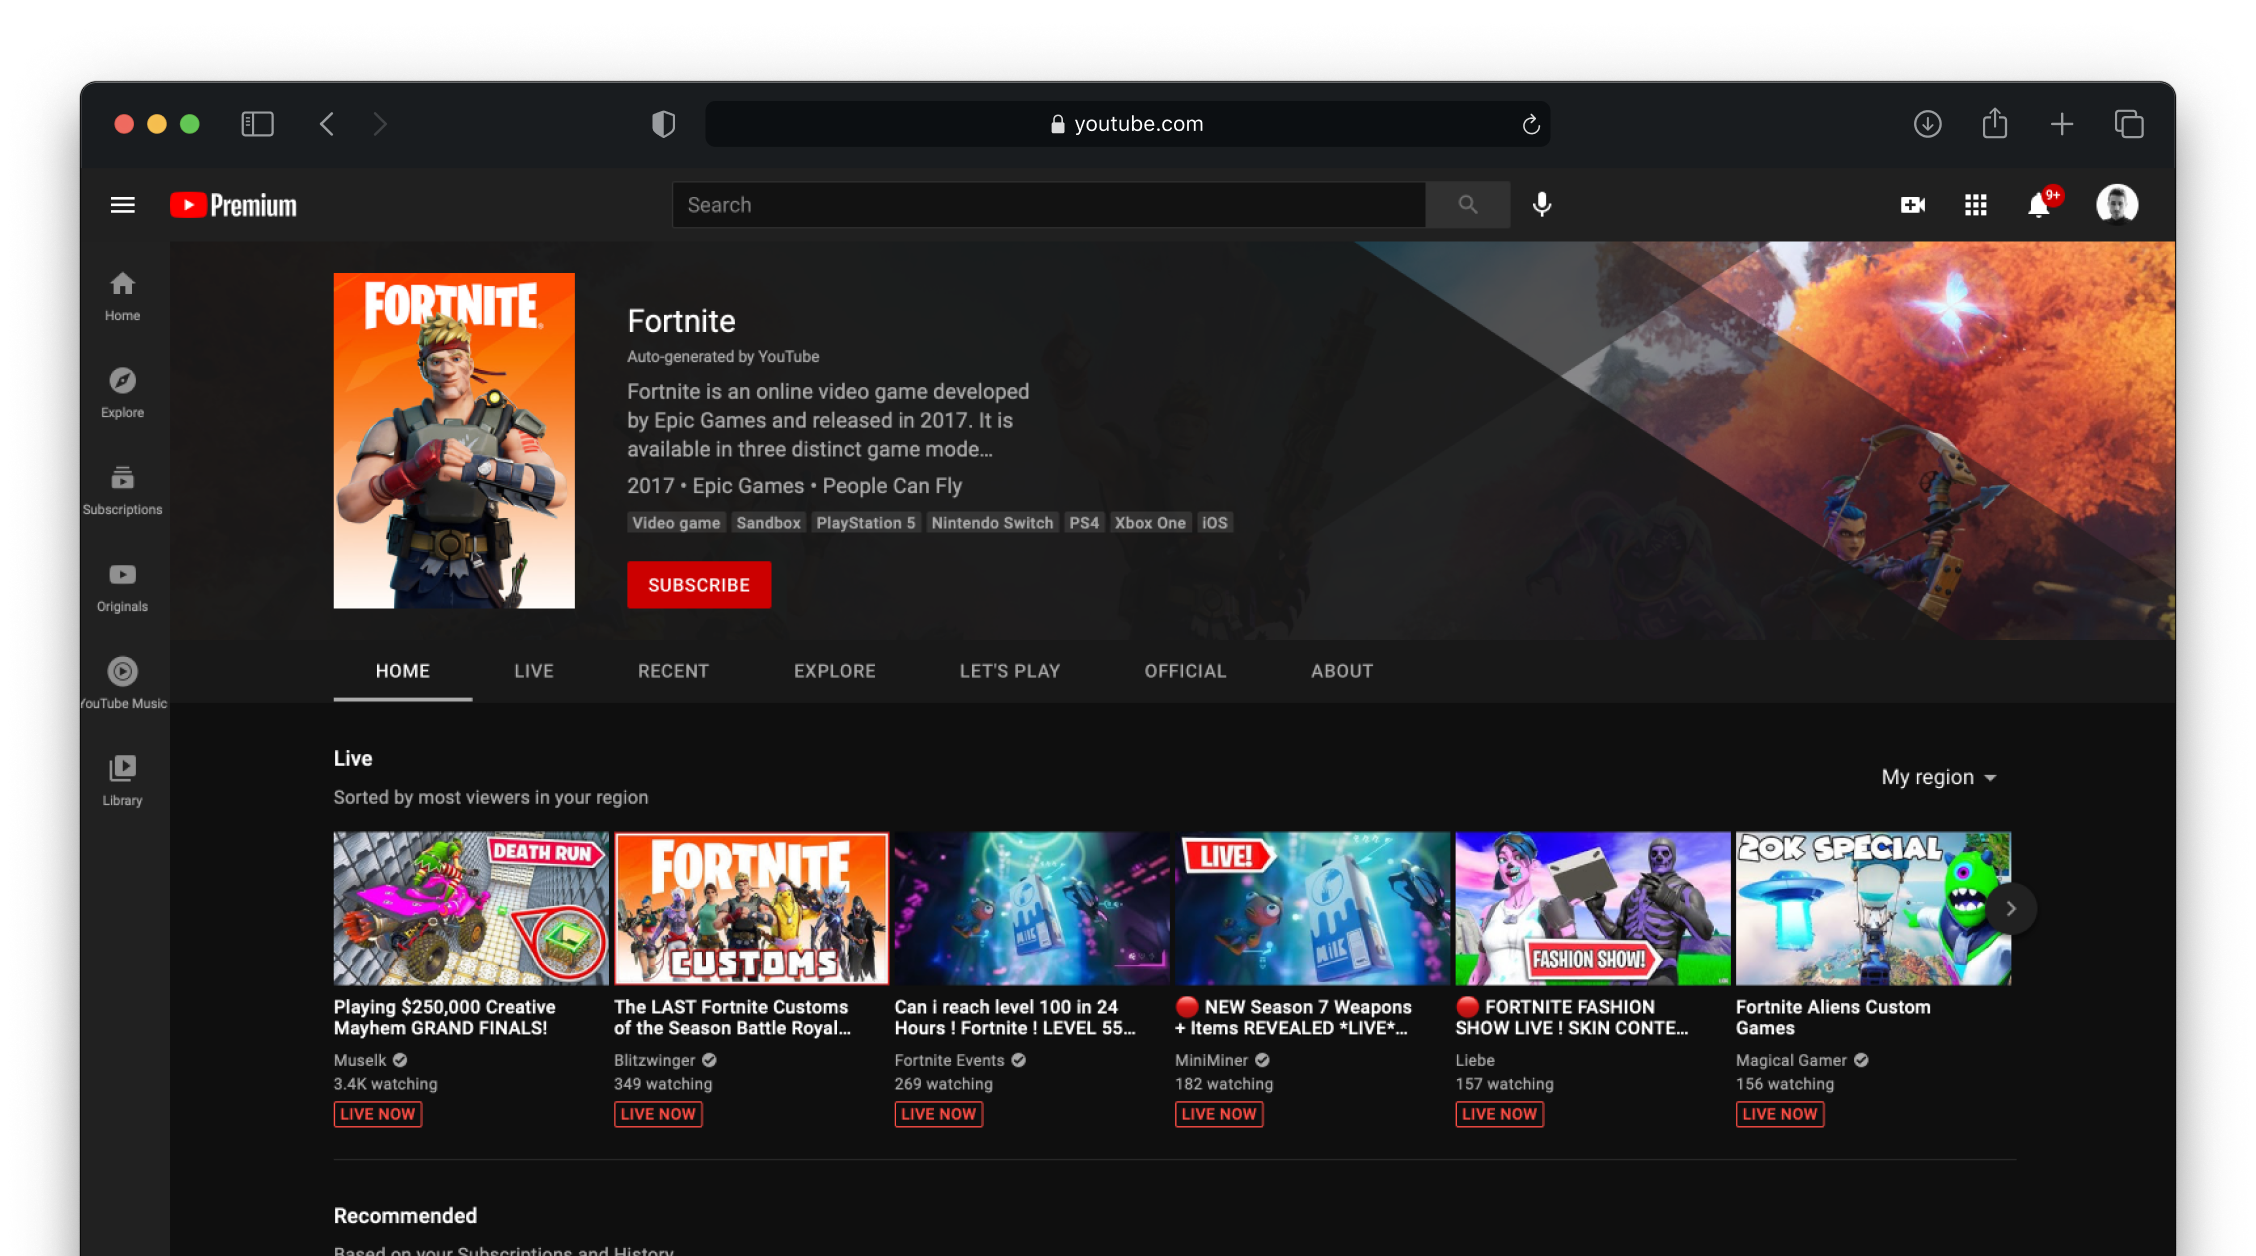 The YouTube website on a page dedicated to the game Fortnite